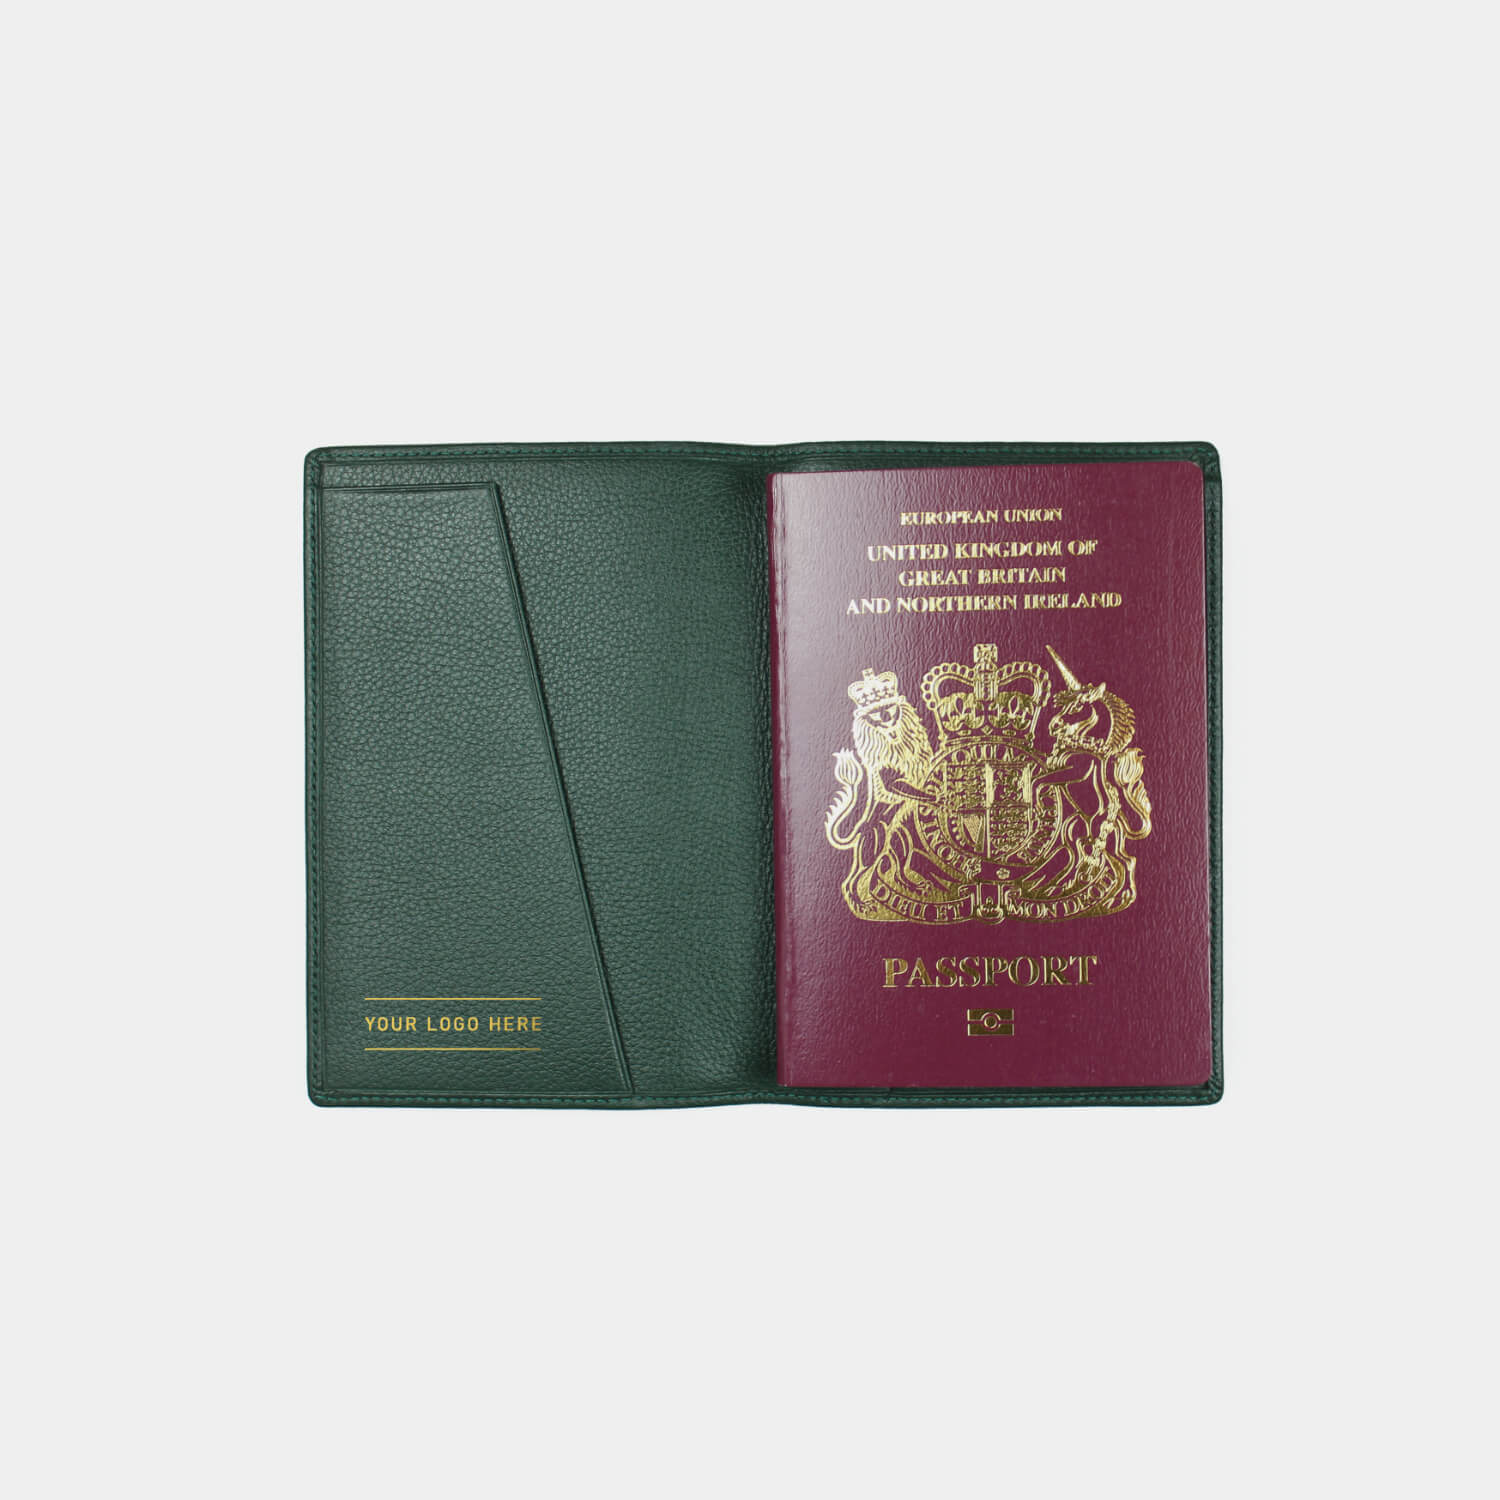 Fine grain leather passport case for passport and boarding pass, travel documents